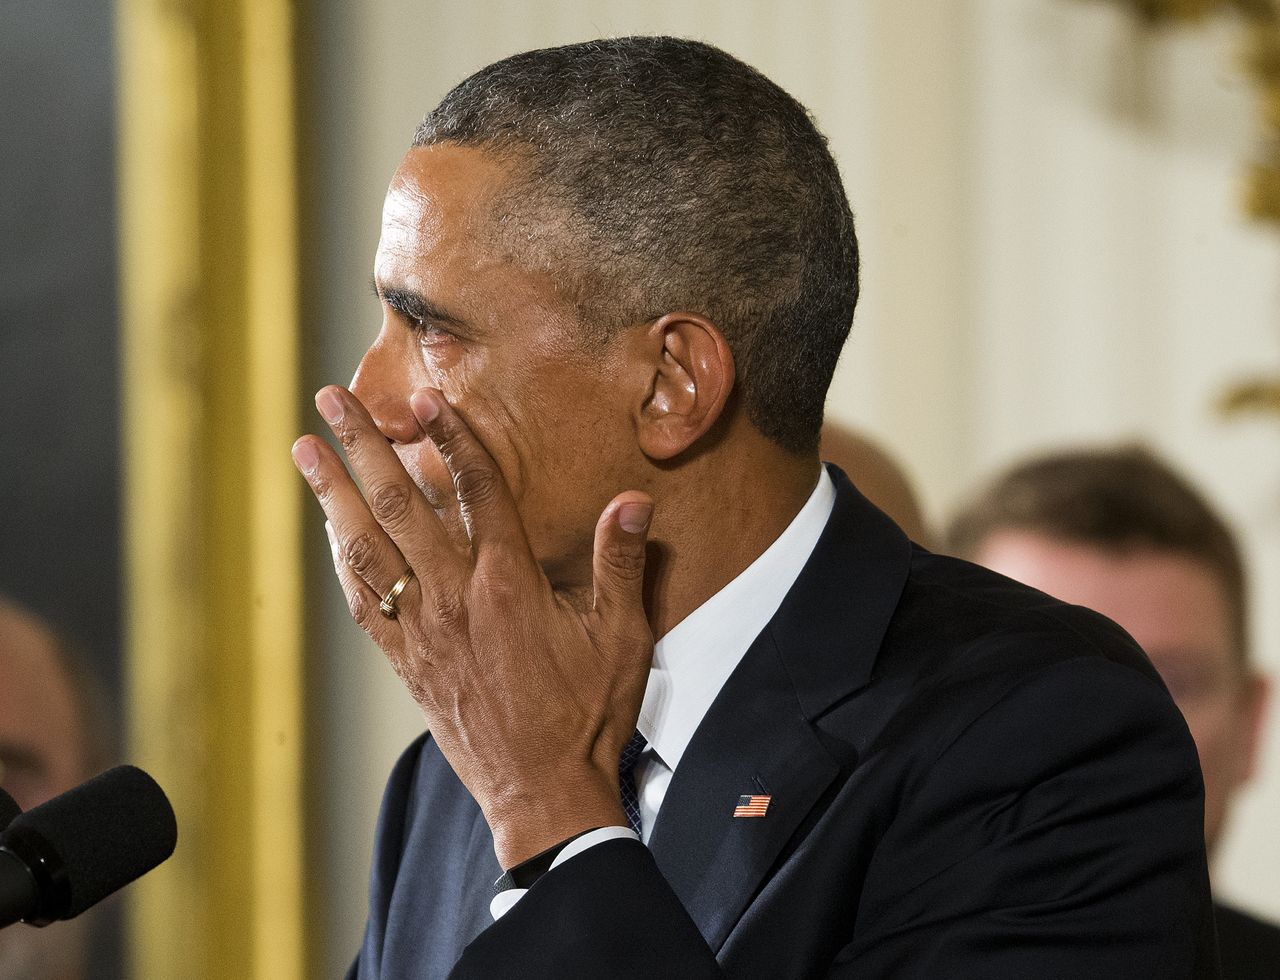 President Barack Obama wipes a tear running down his cheek as he talks about victims of the Sandy Hook shootings in a speech on gun control in 2016.